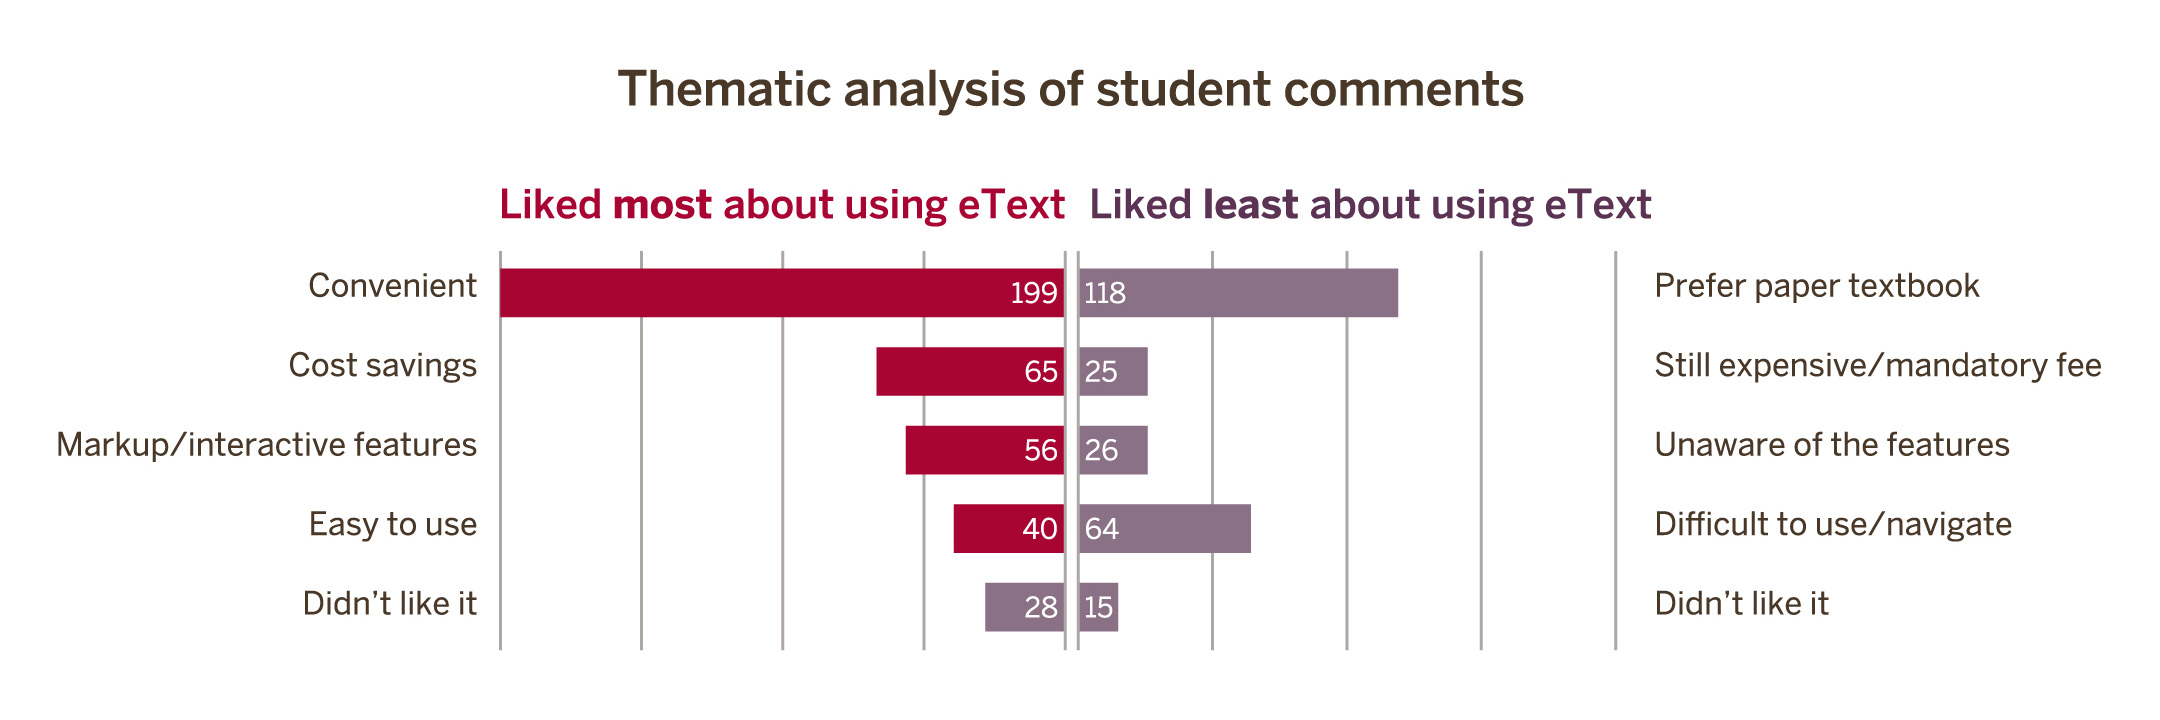 Thematic analysis of student comments